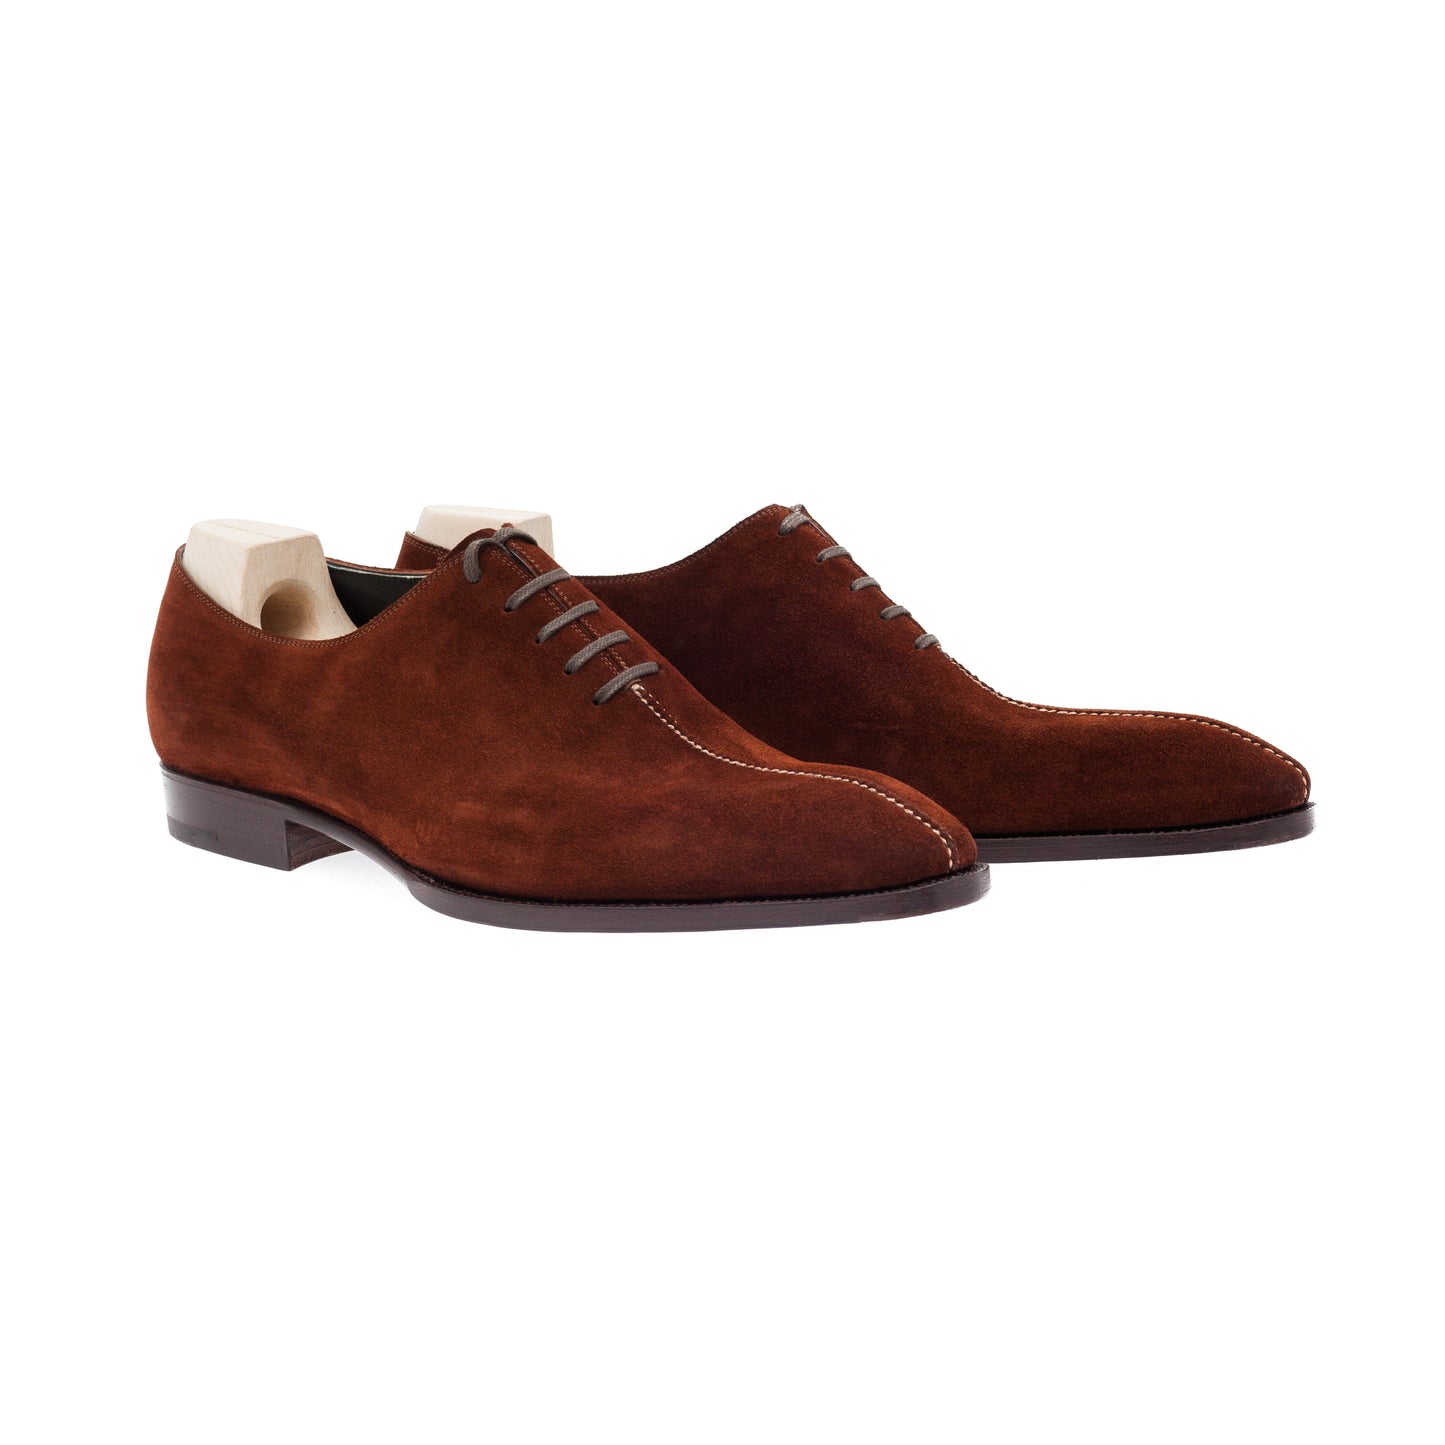 Oxford, center seam in Tabbachho suede Hunting calf leather, green lining